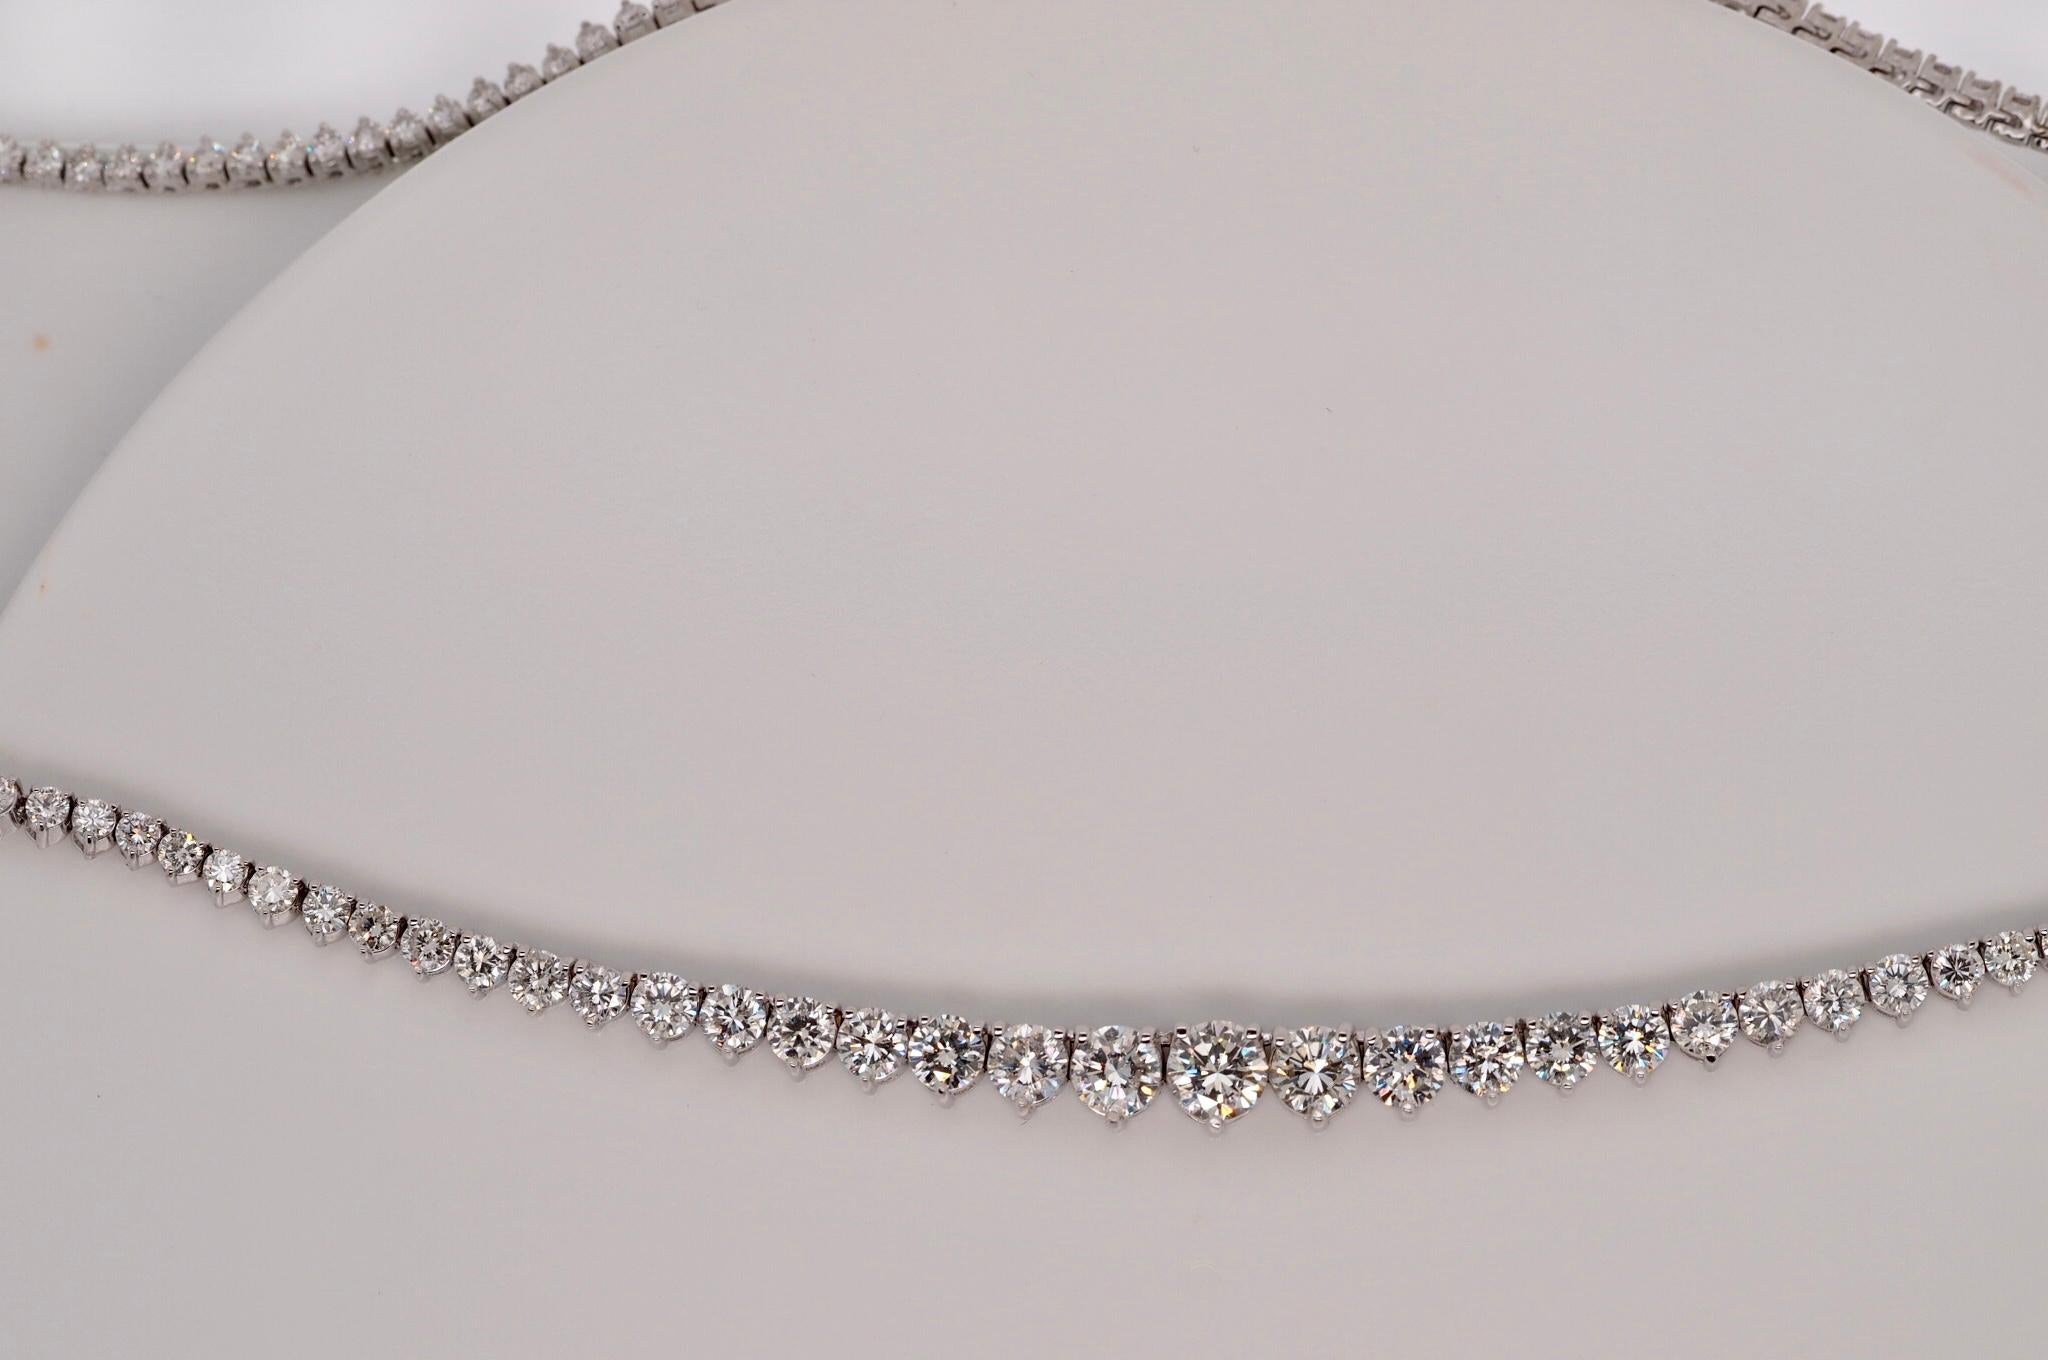 This stunning 14 Karat White Gold Round Brilliant Cut Diamond Tennis Necklace includes 153 individually set 3- prong Diamonds. The total diamond weight is 10 carats. They taper in size top to bottom from 1.91mm to a 5.20mm. The closure is a tongue